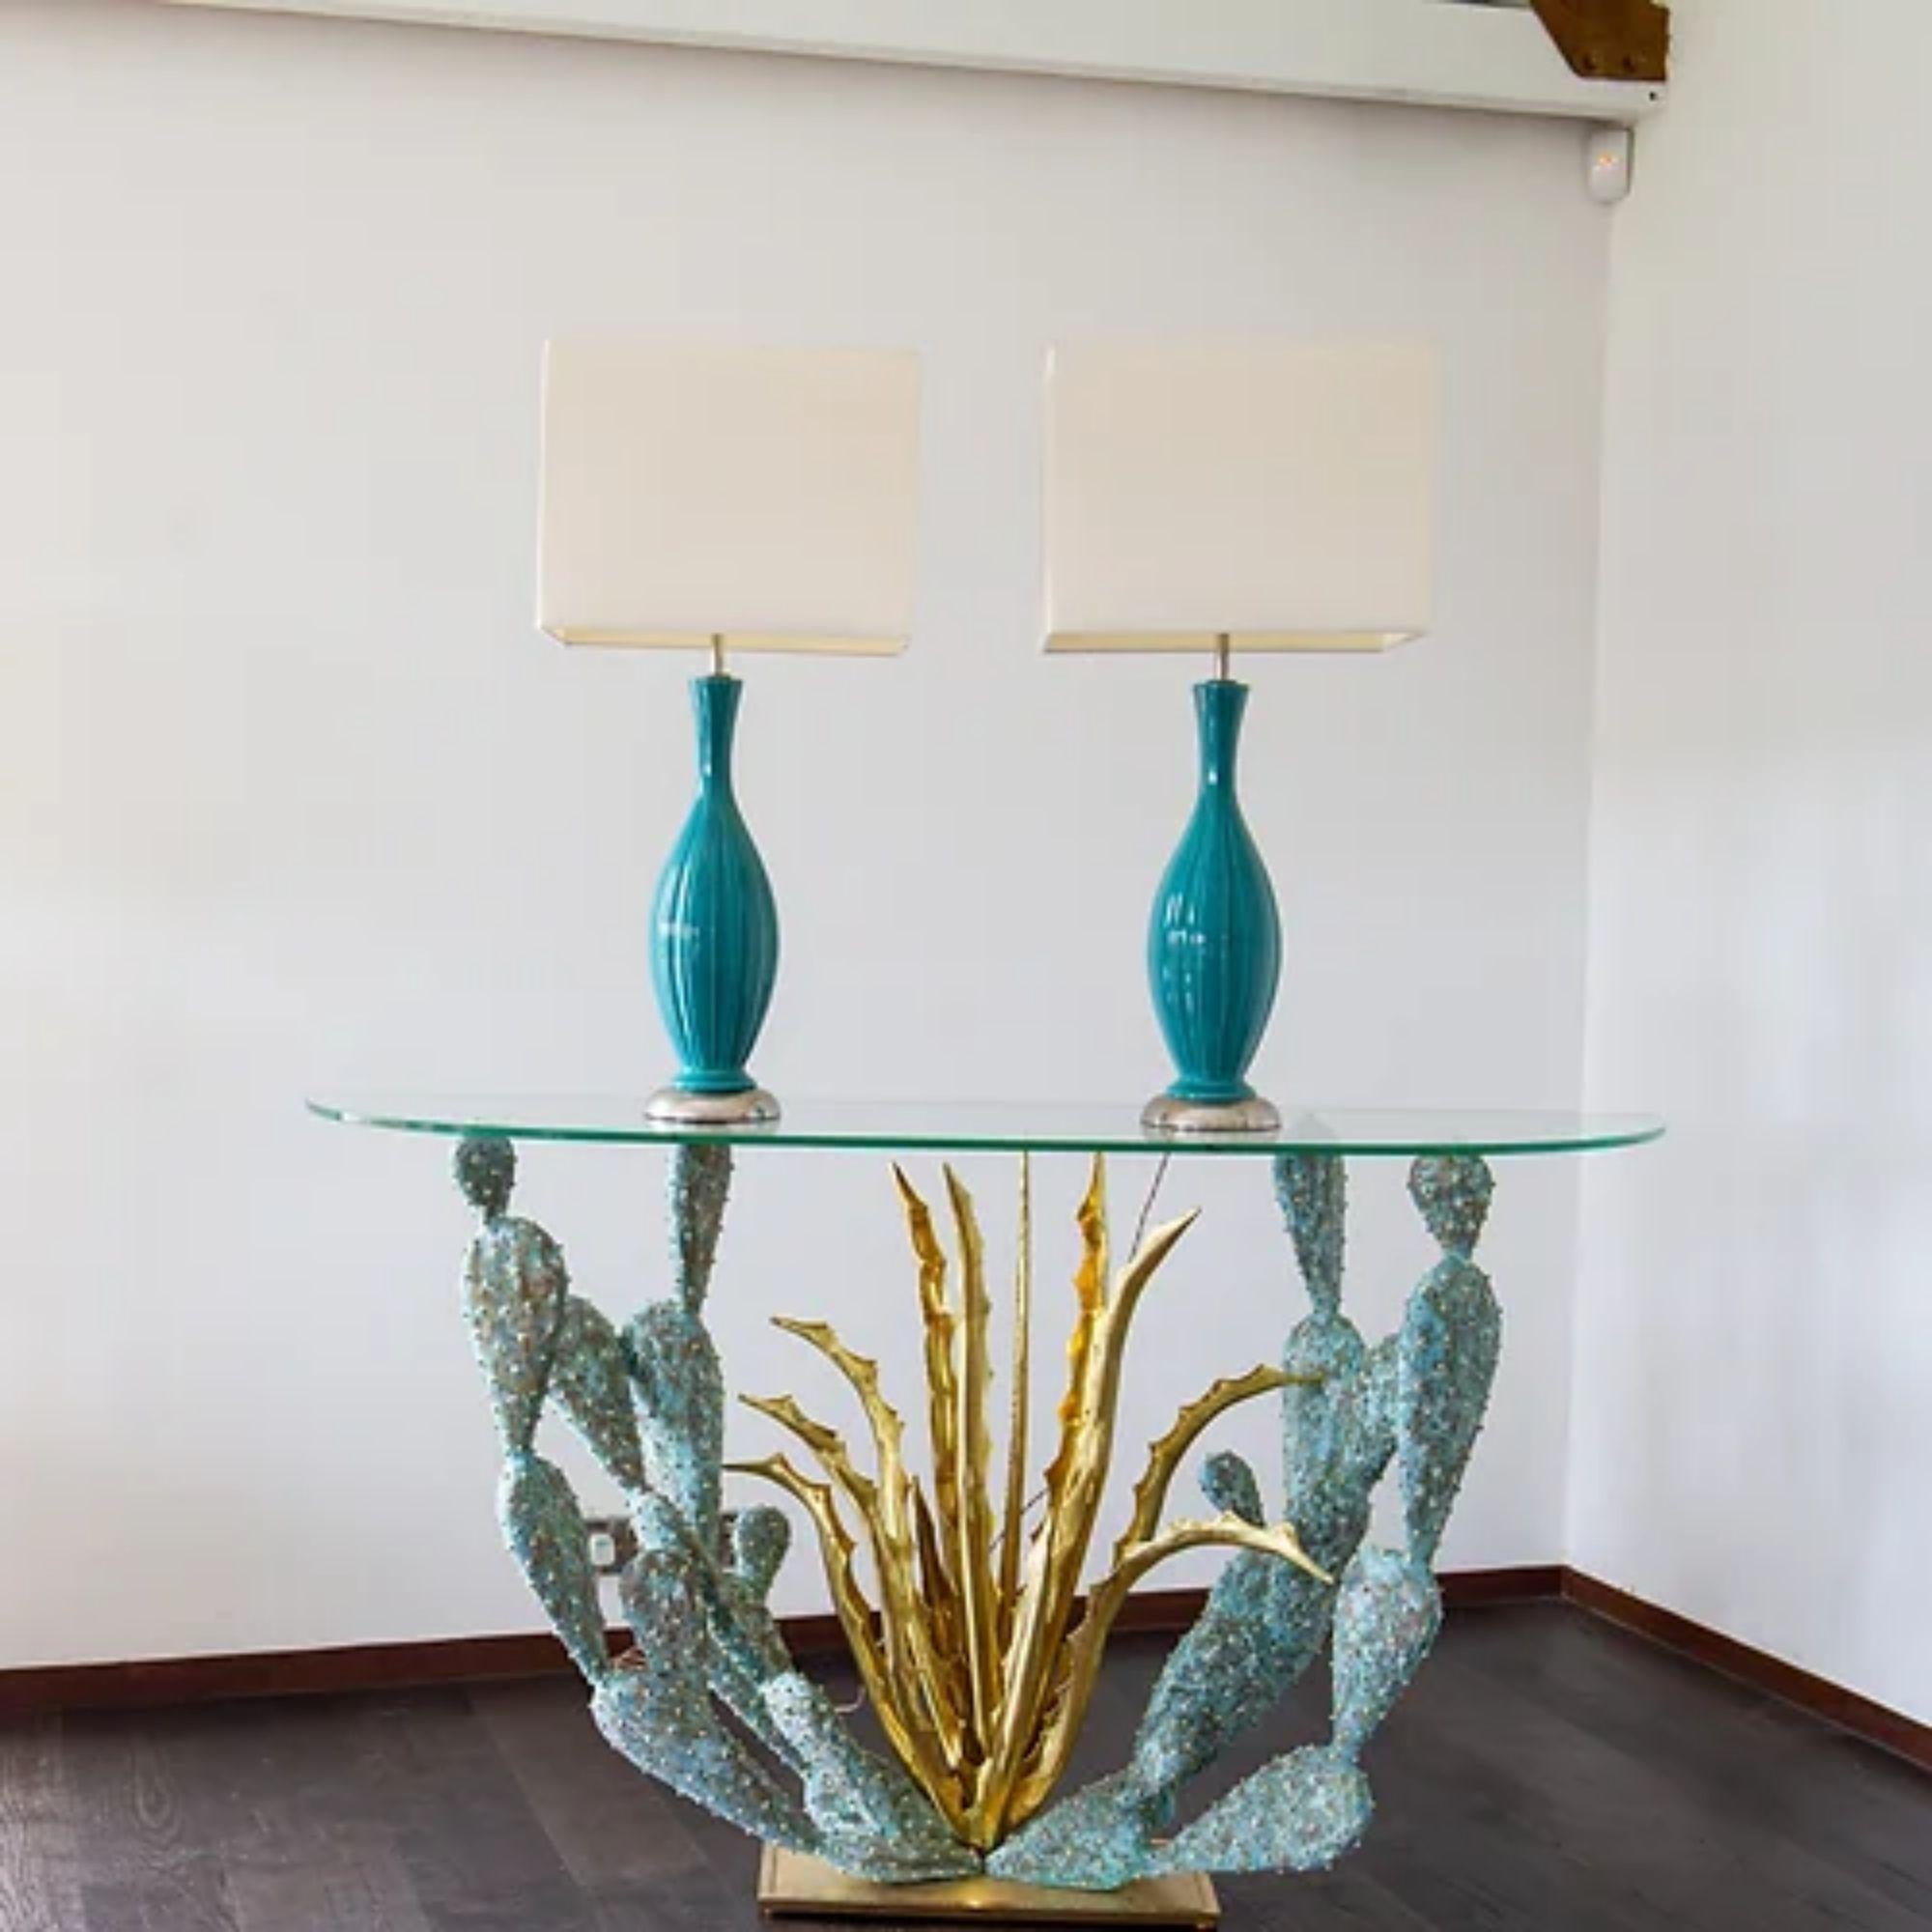 A pair of turquoise ribbed detail ceramic lamps mounted on nickel plated bases, 1960s

Additional information:
Material: Ceramic
Dimensions: 17 W x 90 H cm.